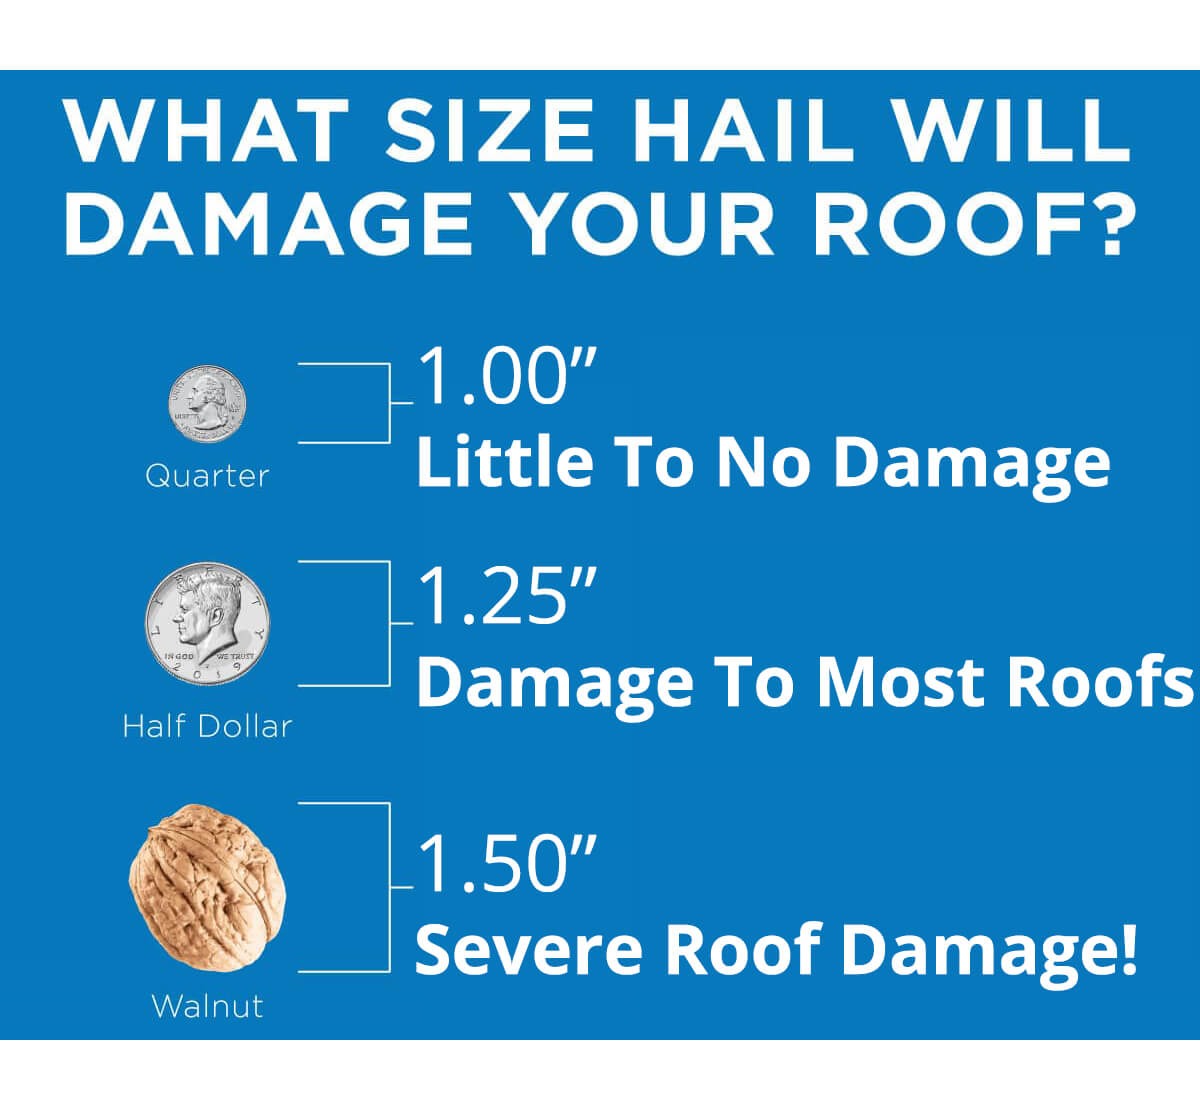 What Size Hail Causes Damage?